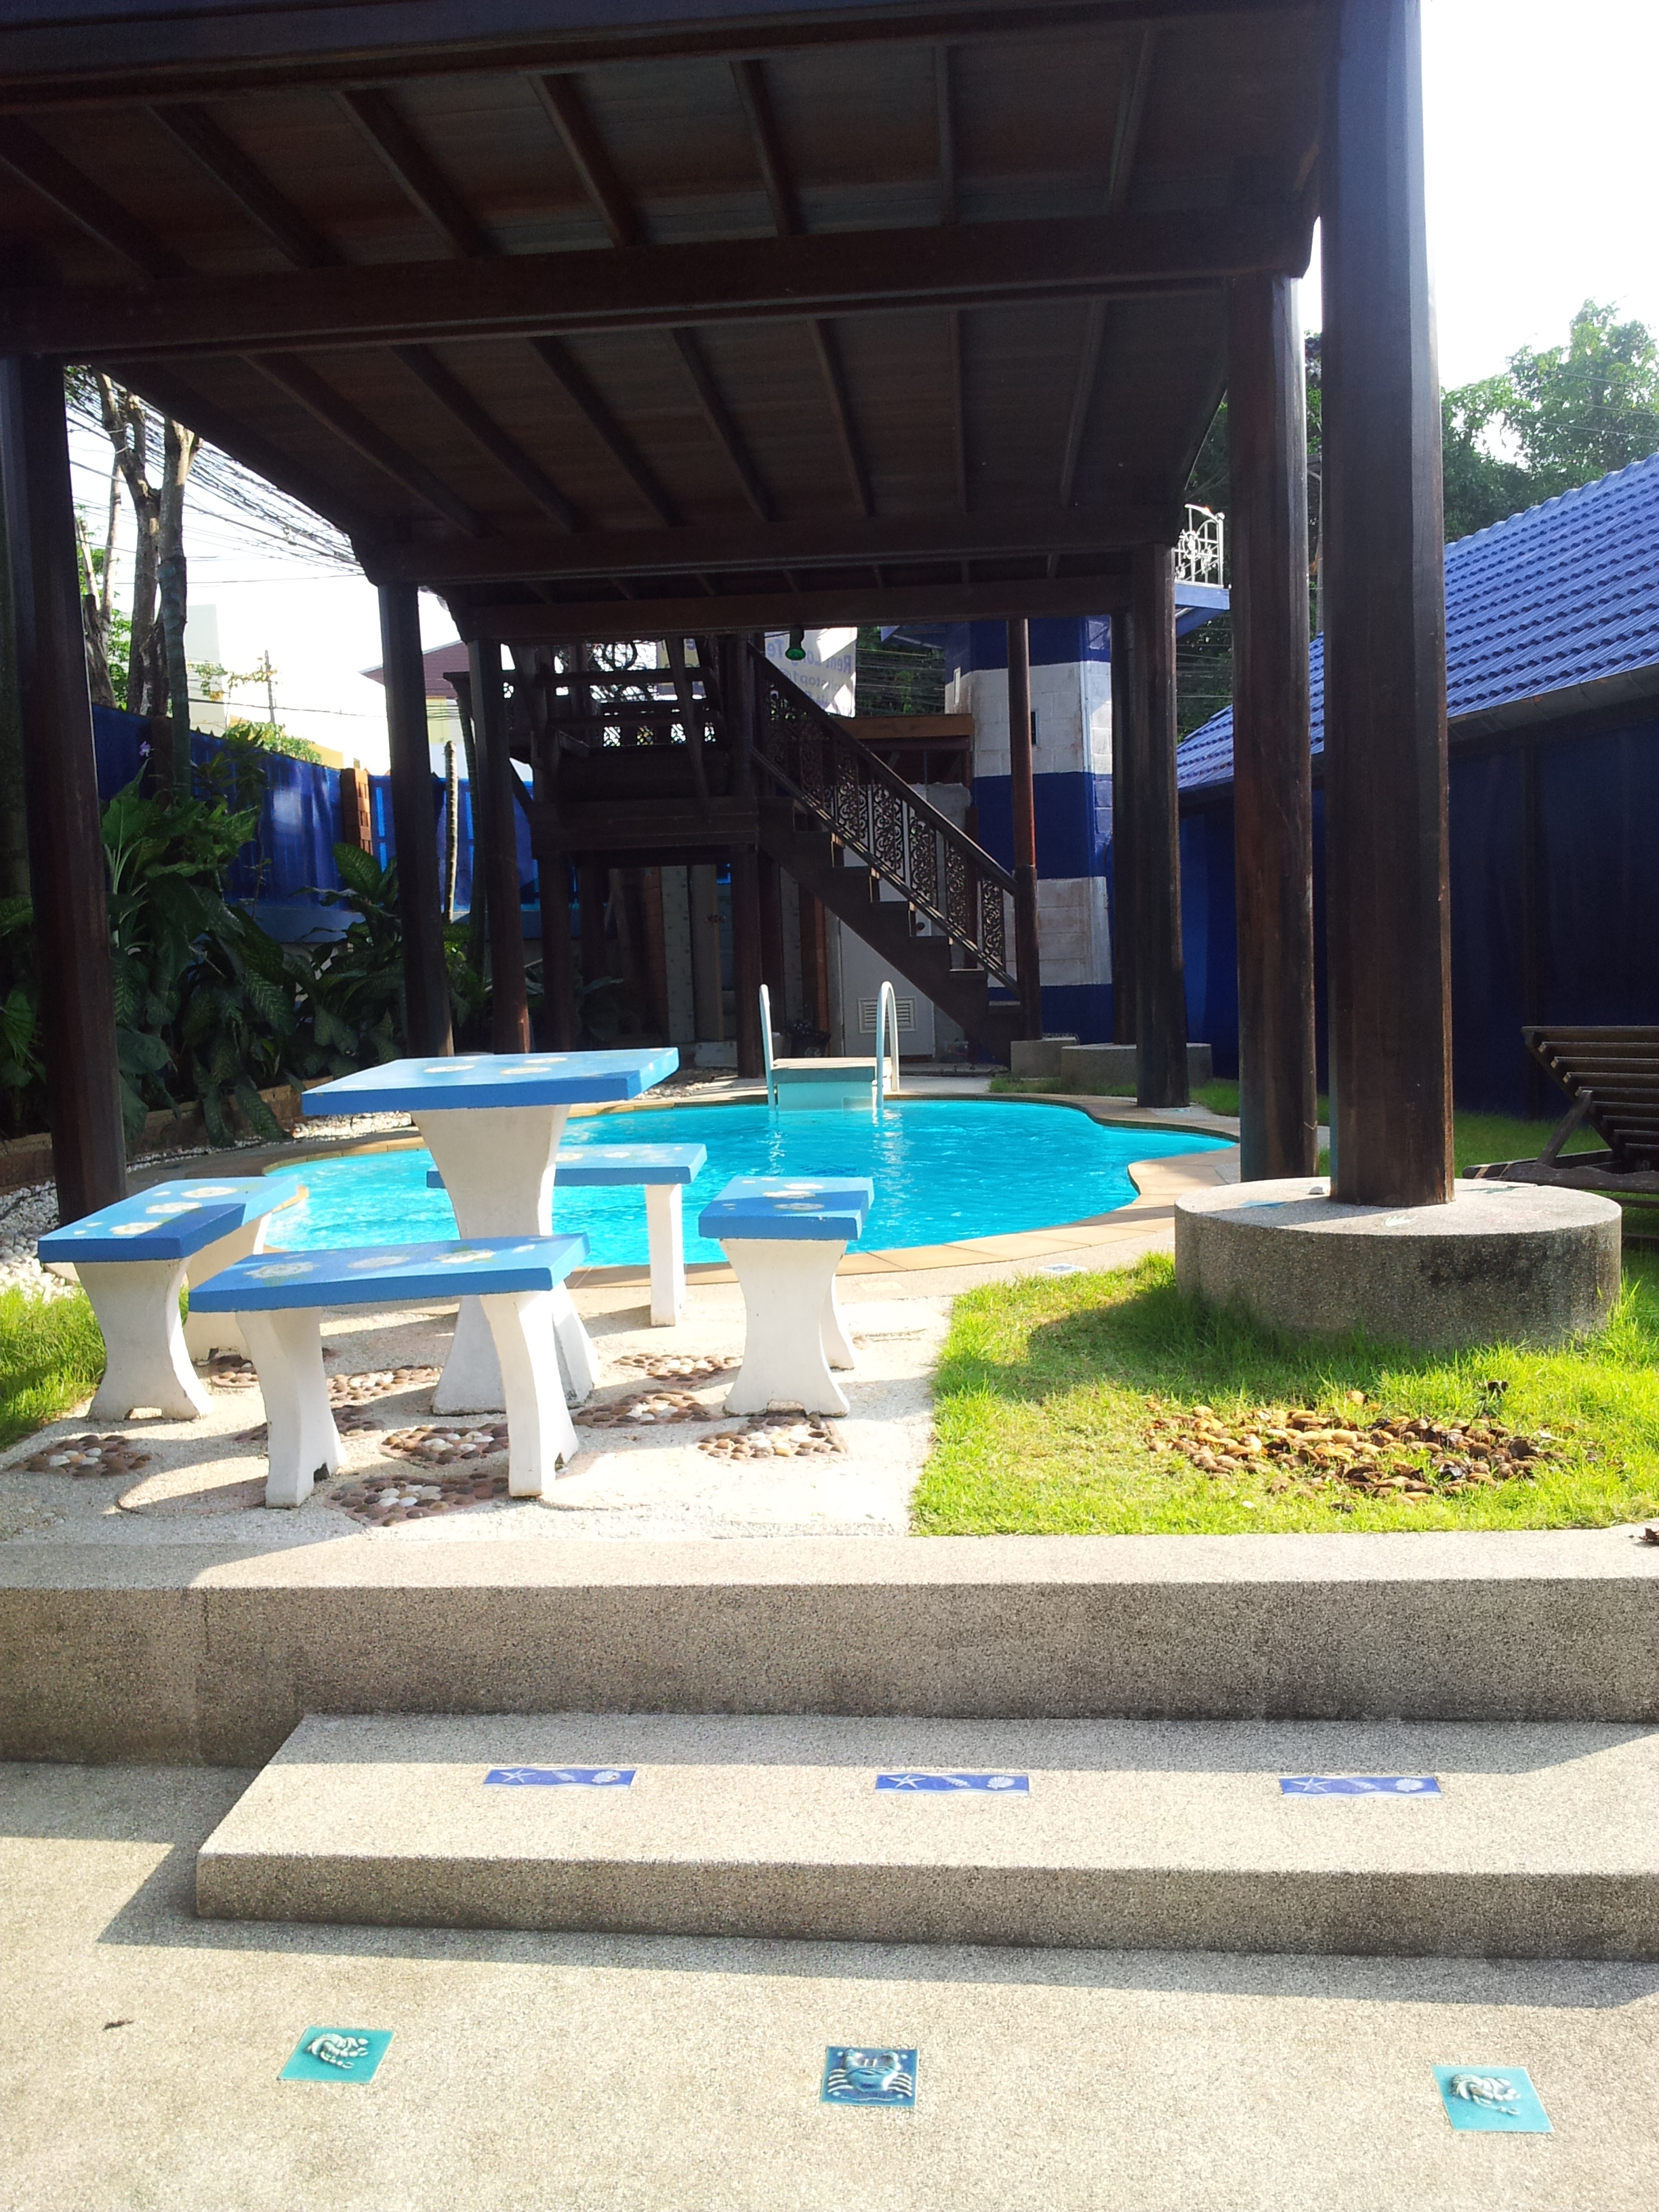 3 bed room Thai style villa, guest house in Phuket